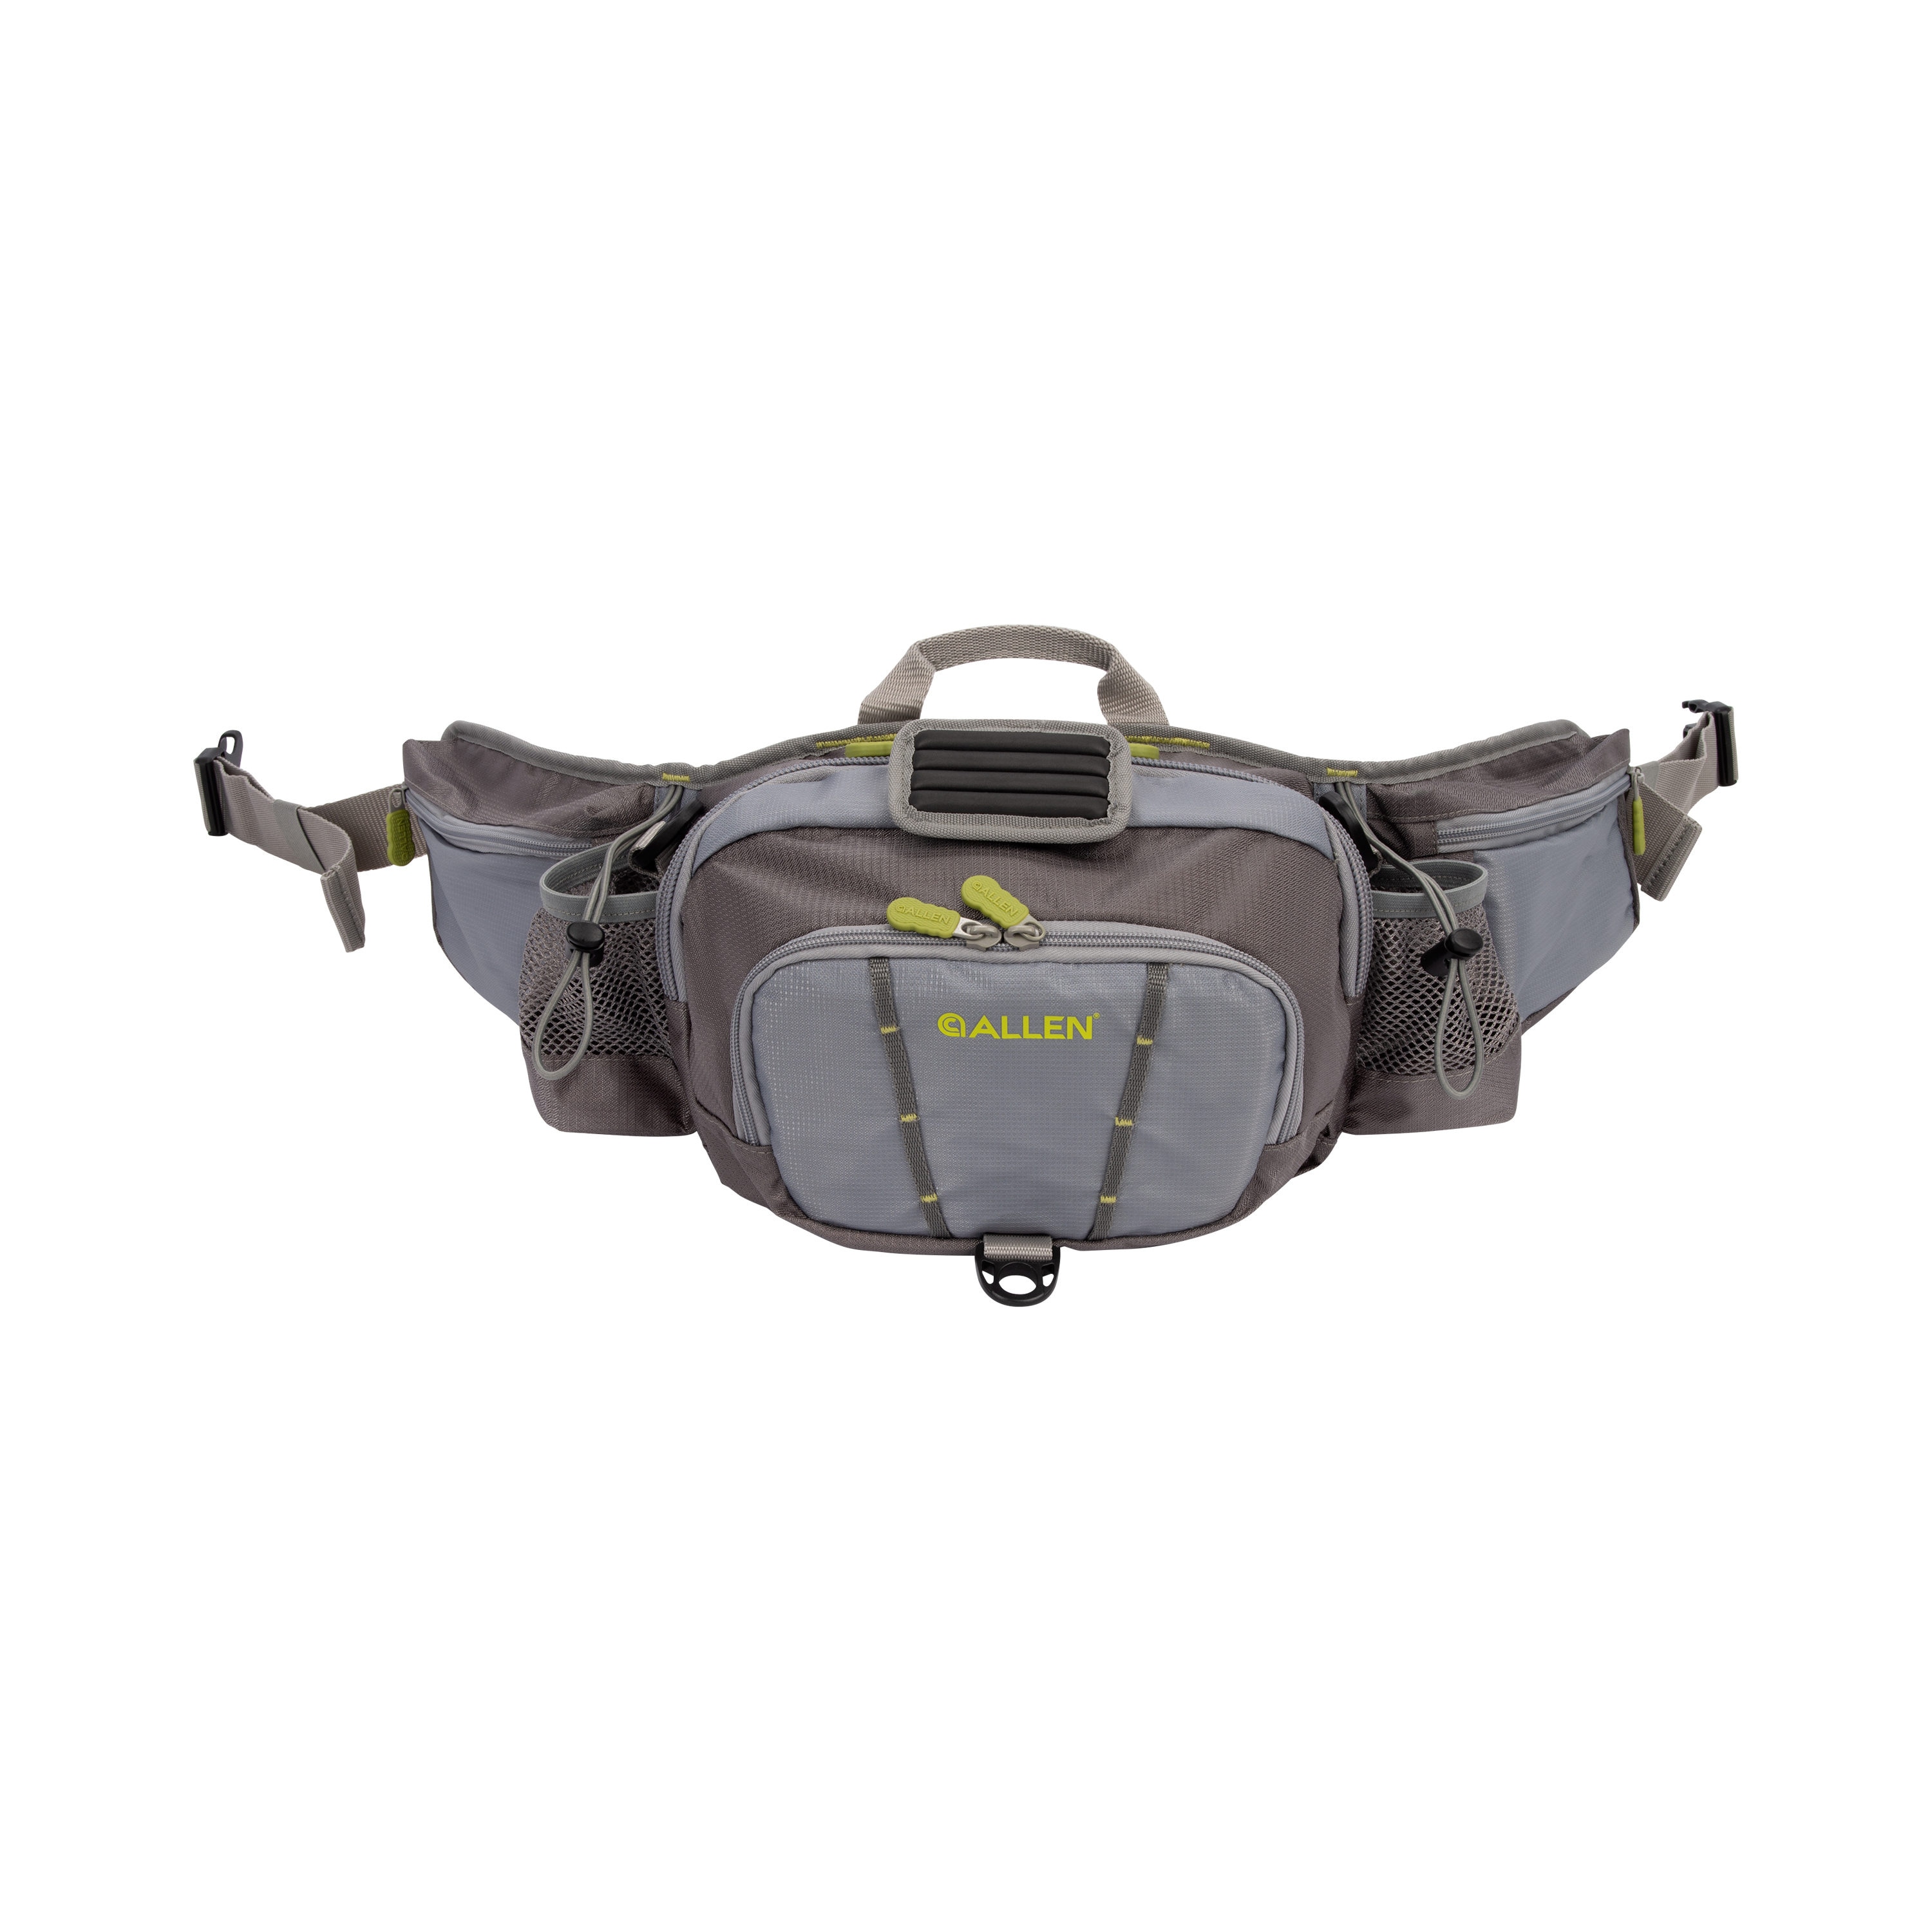 Allen Company Bear Creek Gray Fishing Chest Pack with Workstation,  Adjustable Straps, and Storage for Fly/Tackle Boxes in the Fishing Gear &  Apparel department at